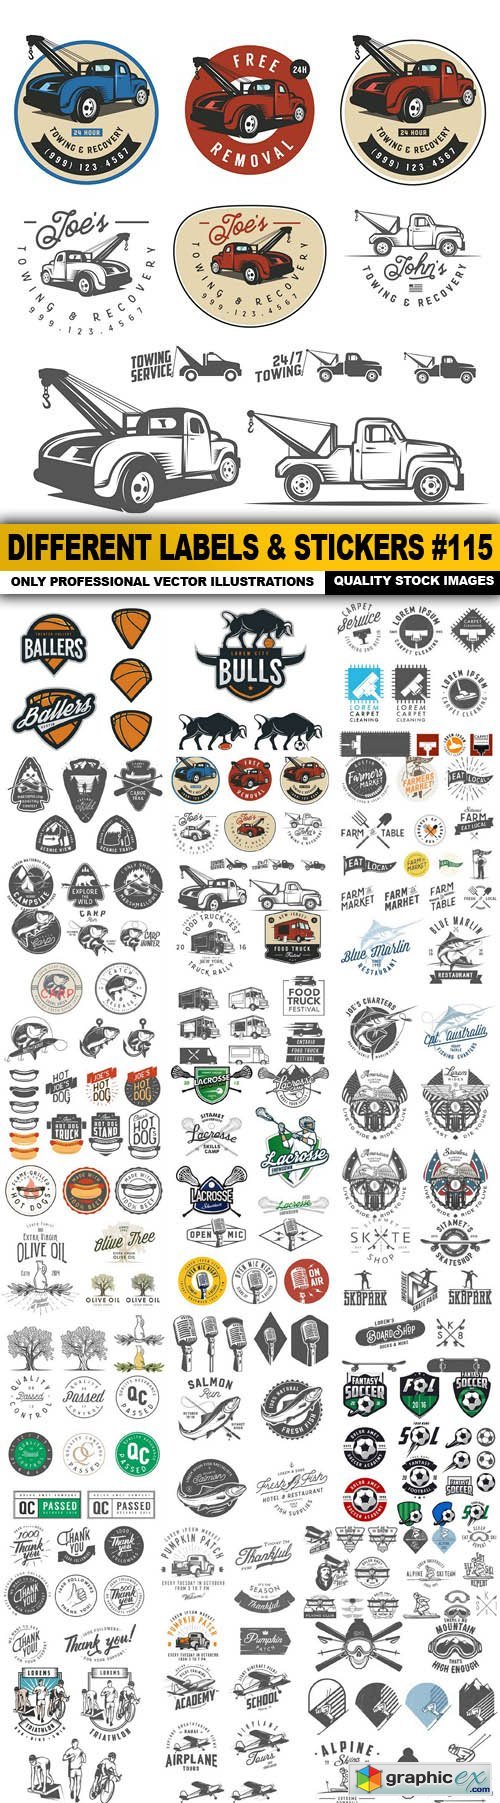 Different Labels & Stickers #115 - 25 Vector